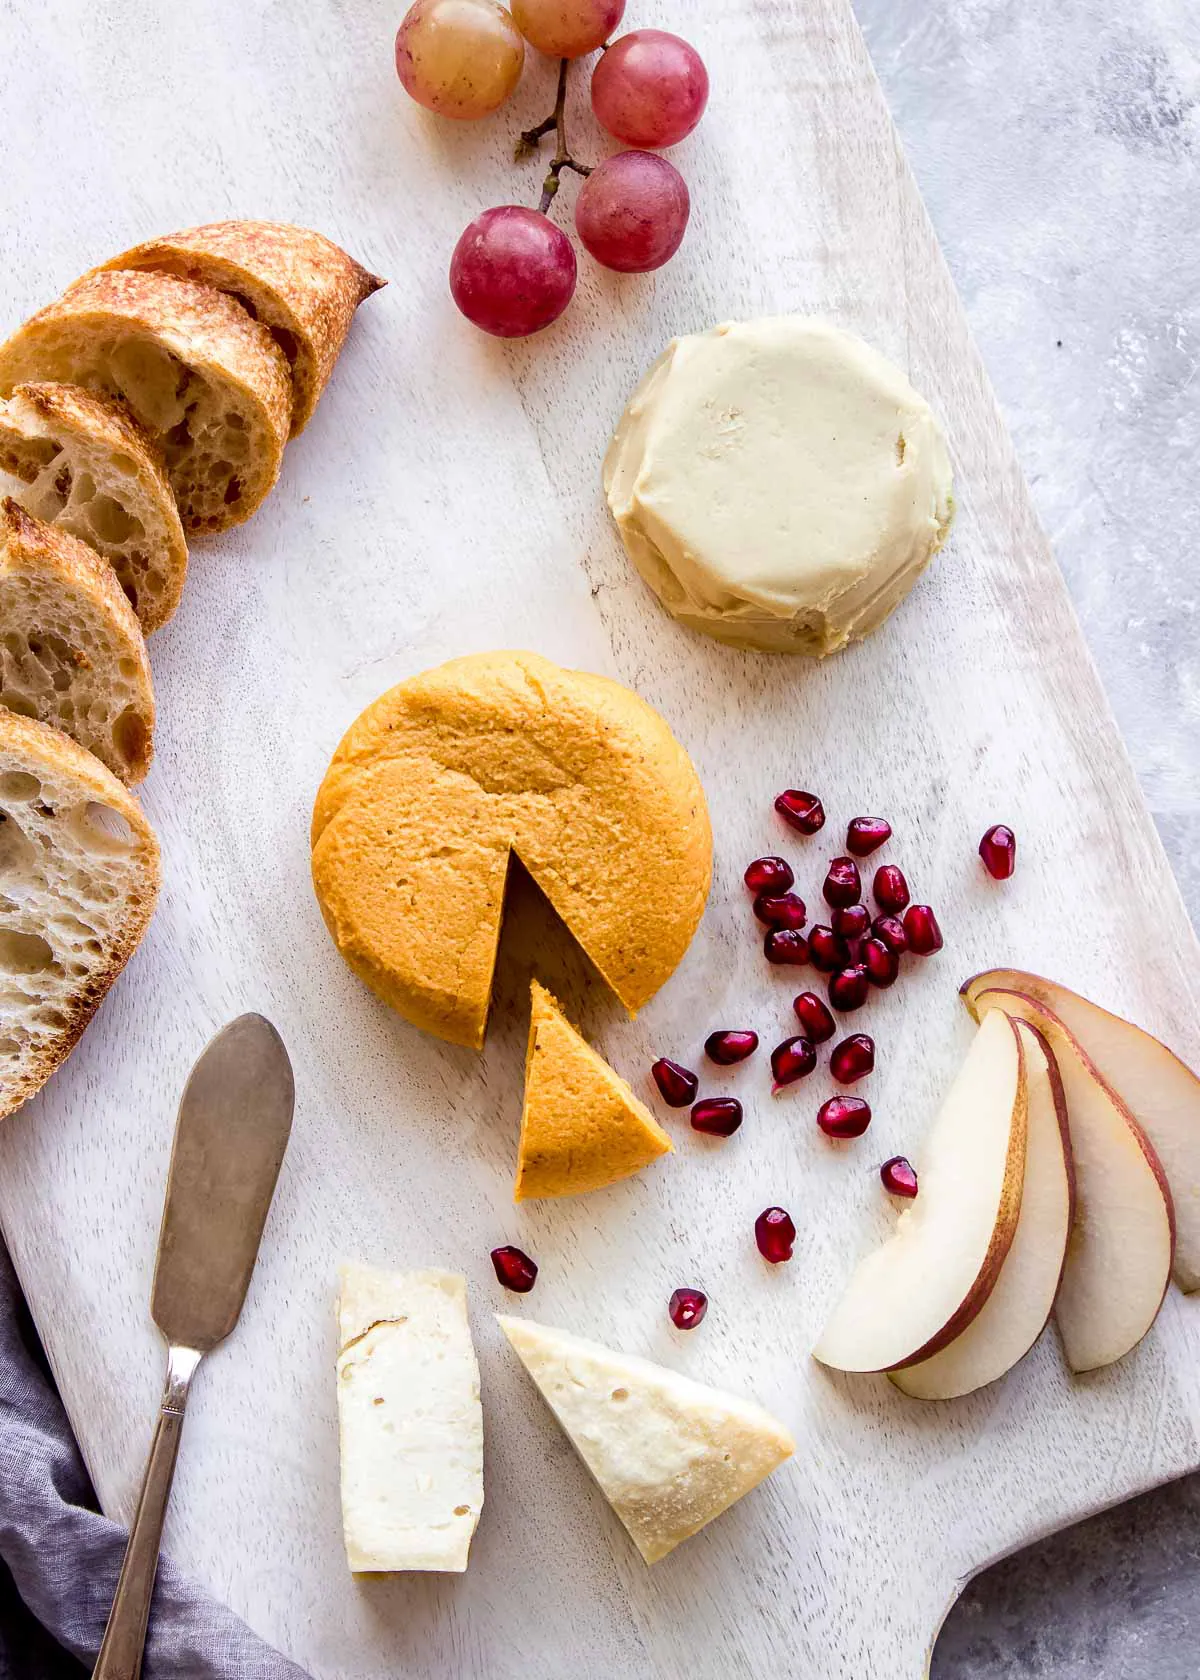 Selection of vegan cheeses, bread and fruit.